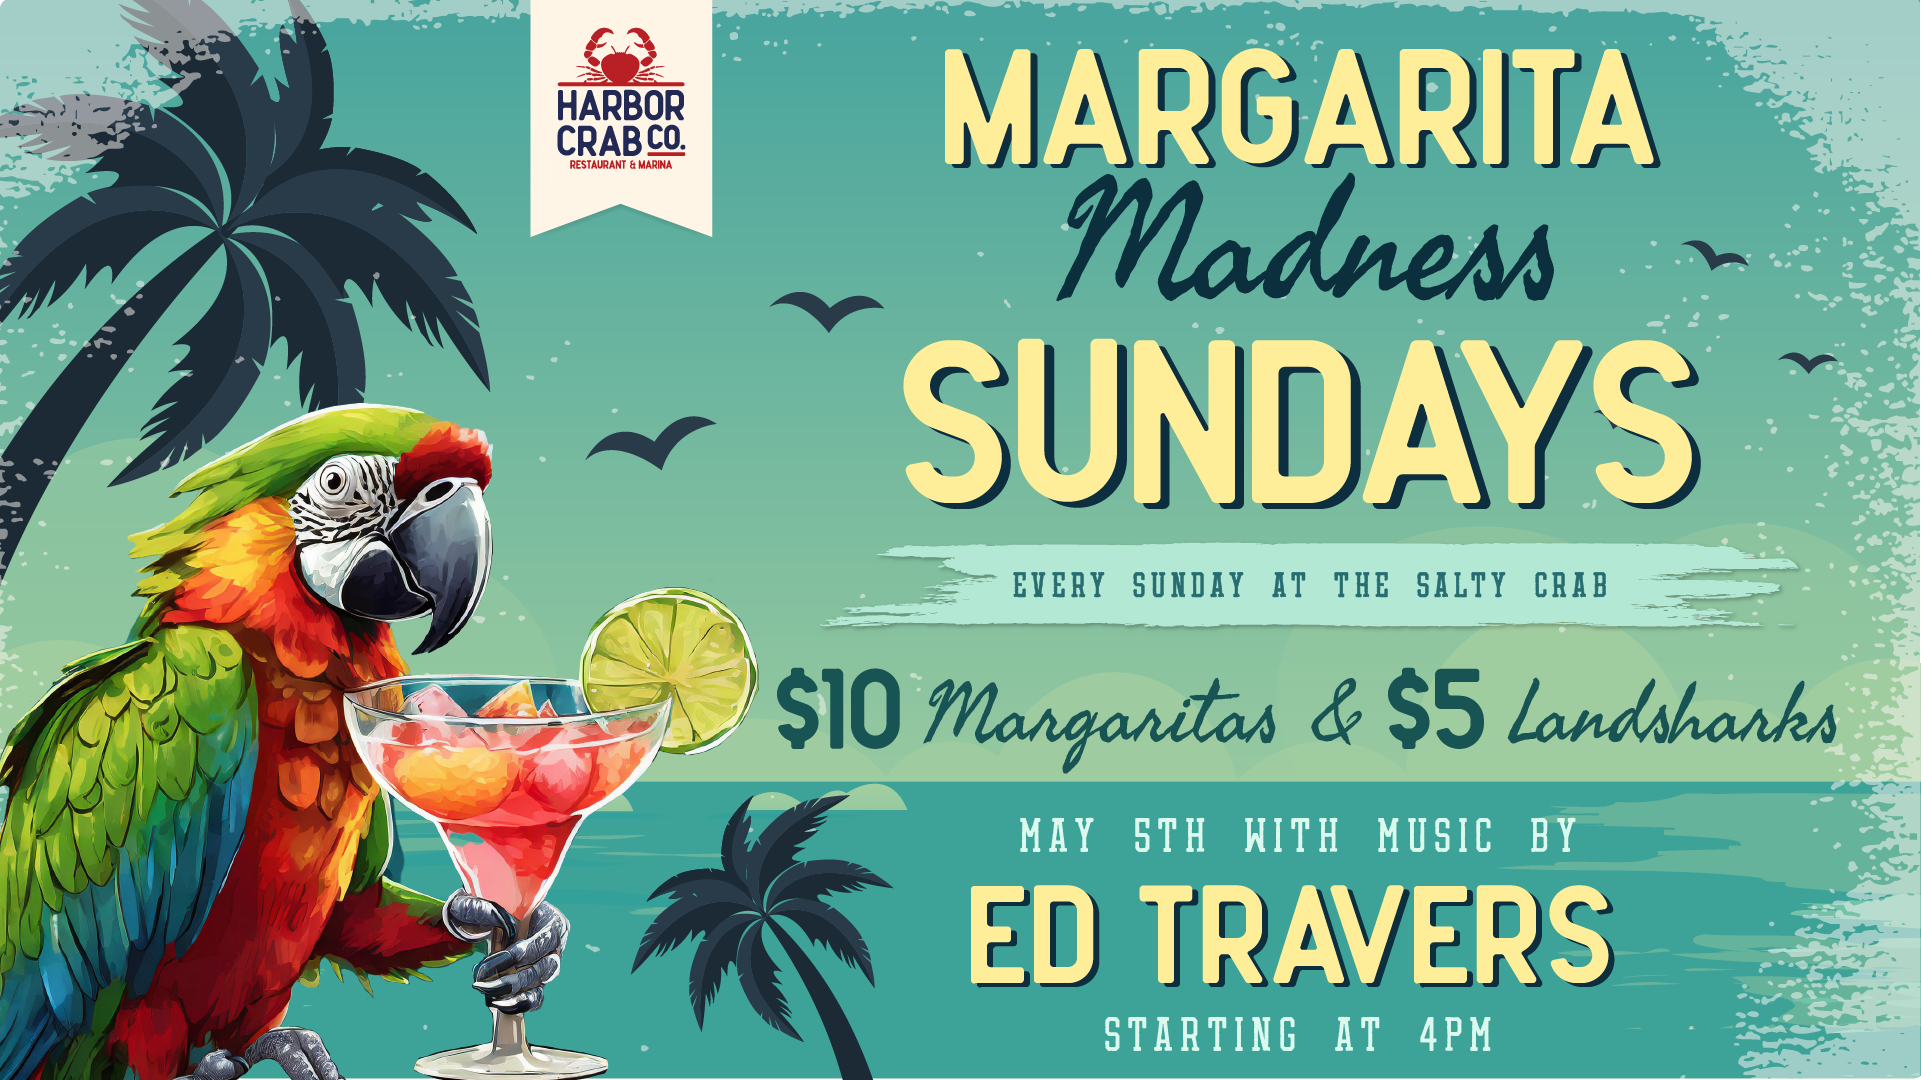 Margarita Madness Sundays at Harbor Crab on May 5th, featuring music by Ed Travers from 4 PM with special drink prices.